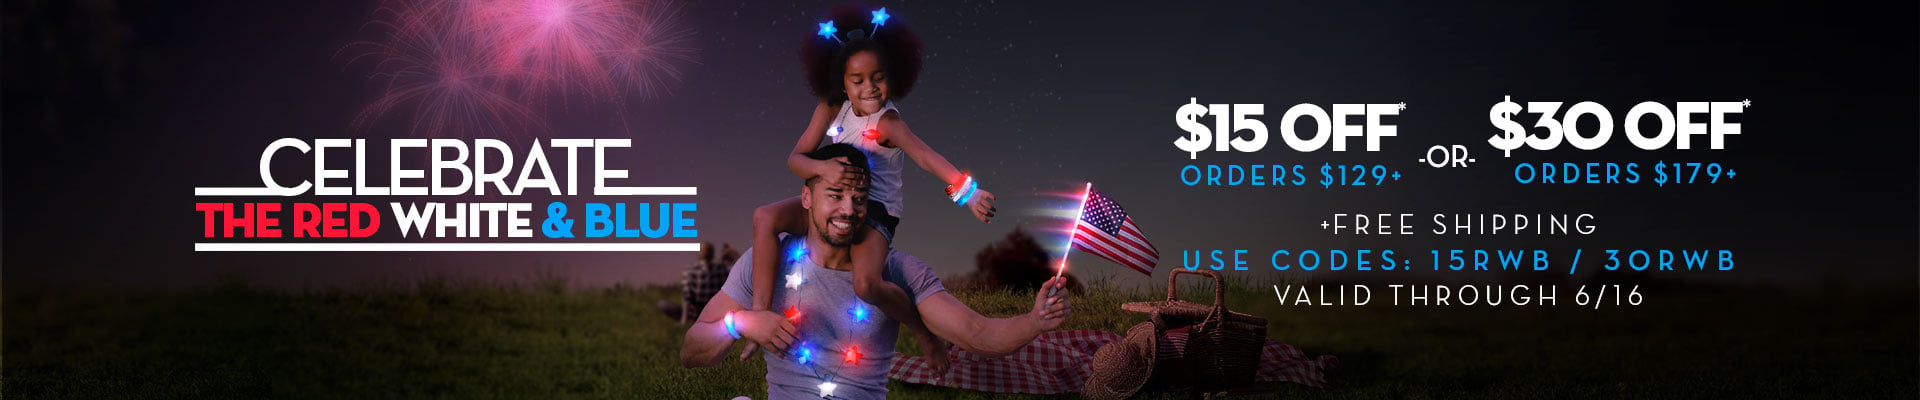 Father and daughter celebrating 4th of July with light up headwear, necklaces, and flags